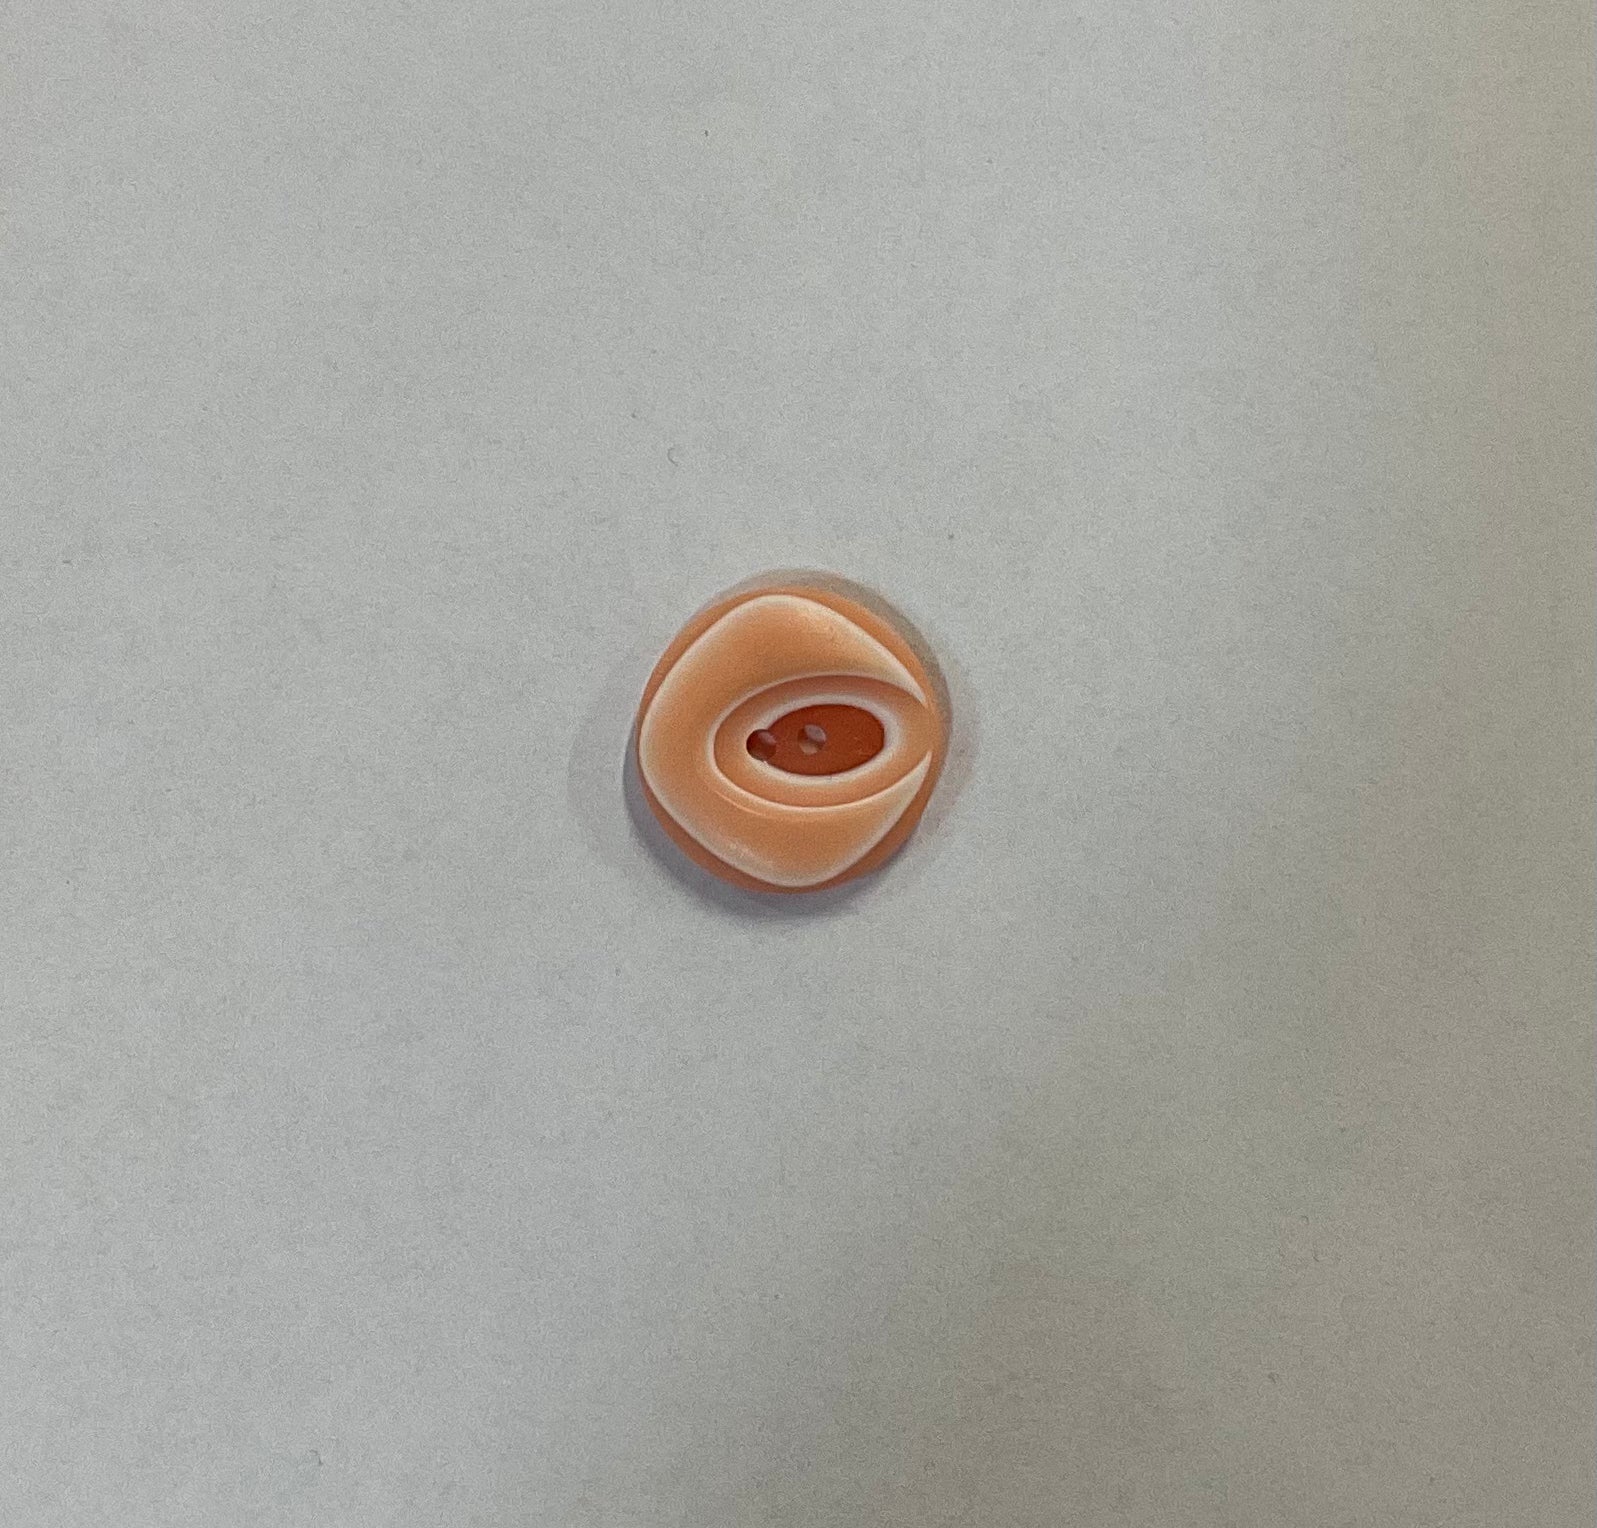 25mm Peach and White 2 holed marbled button